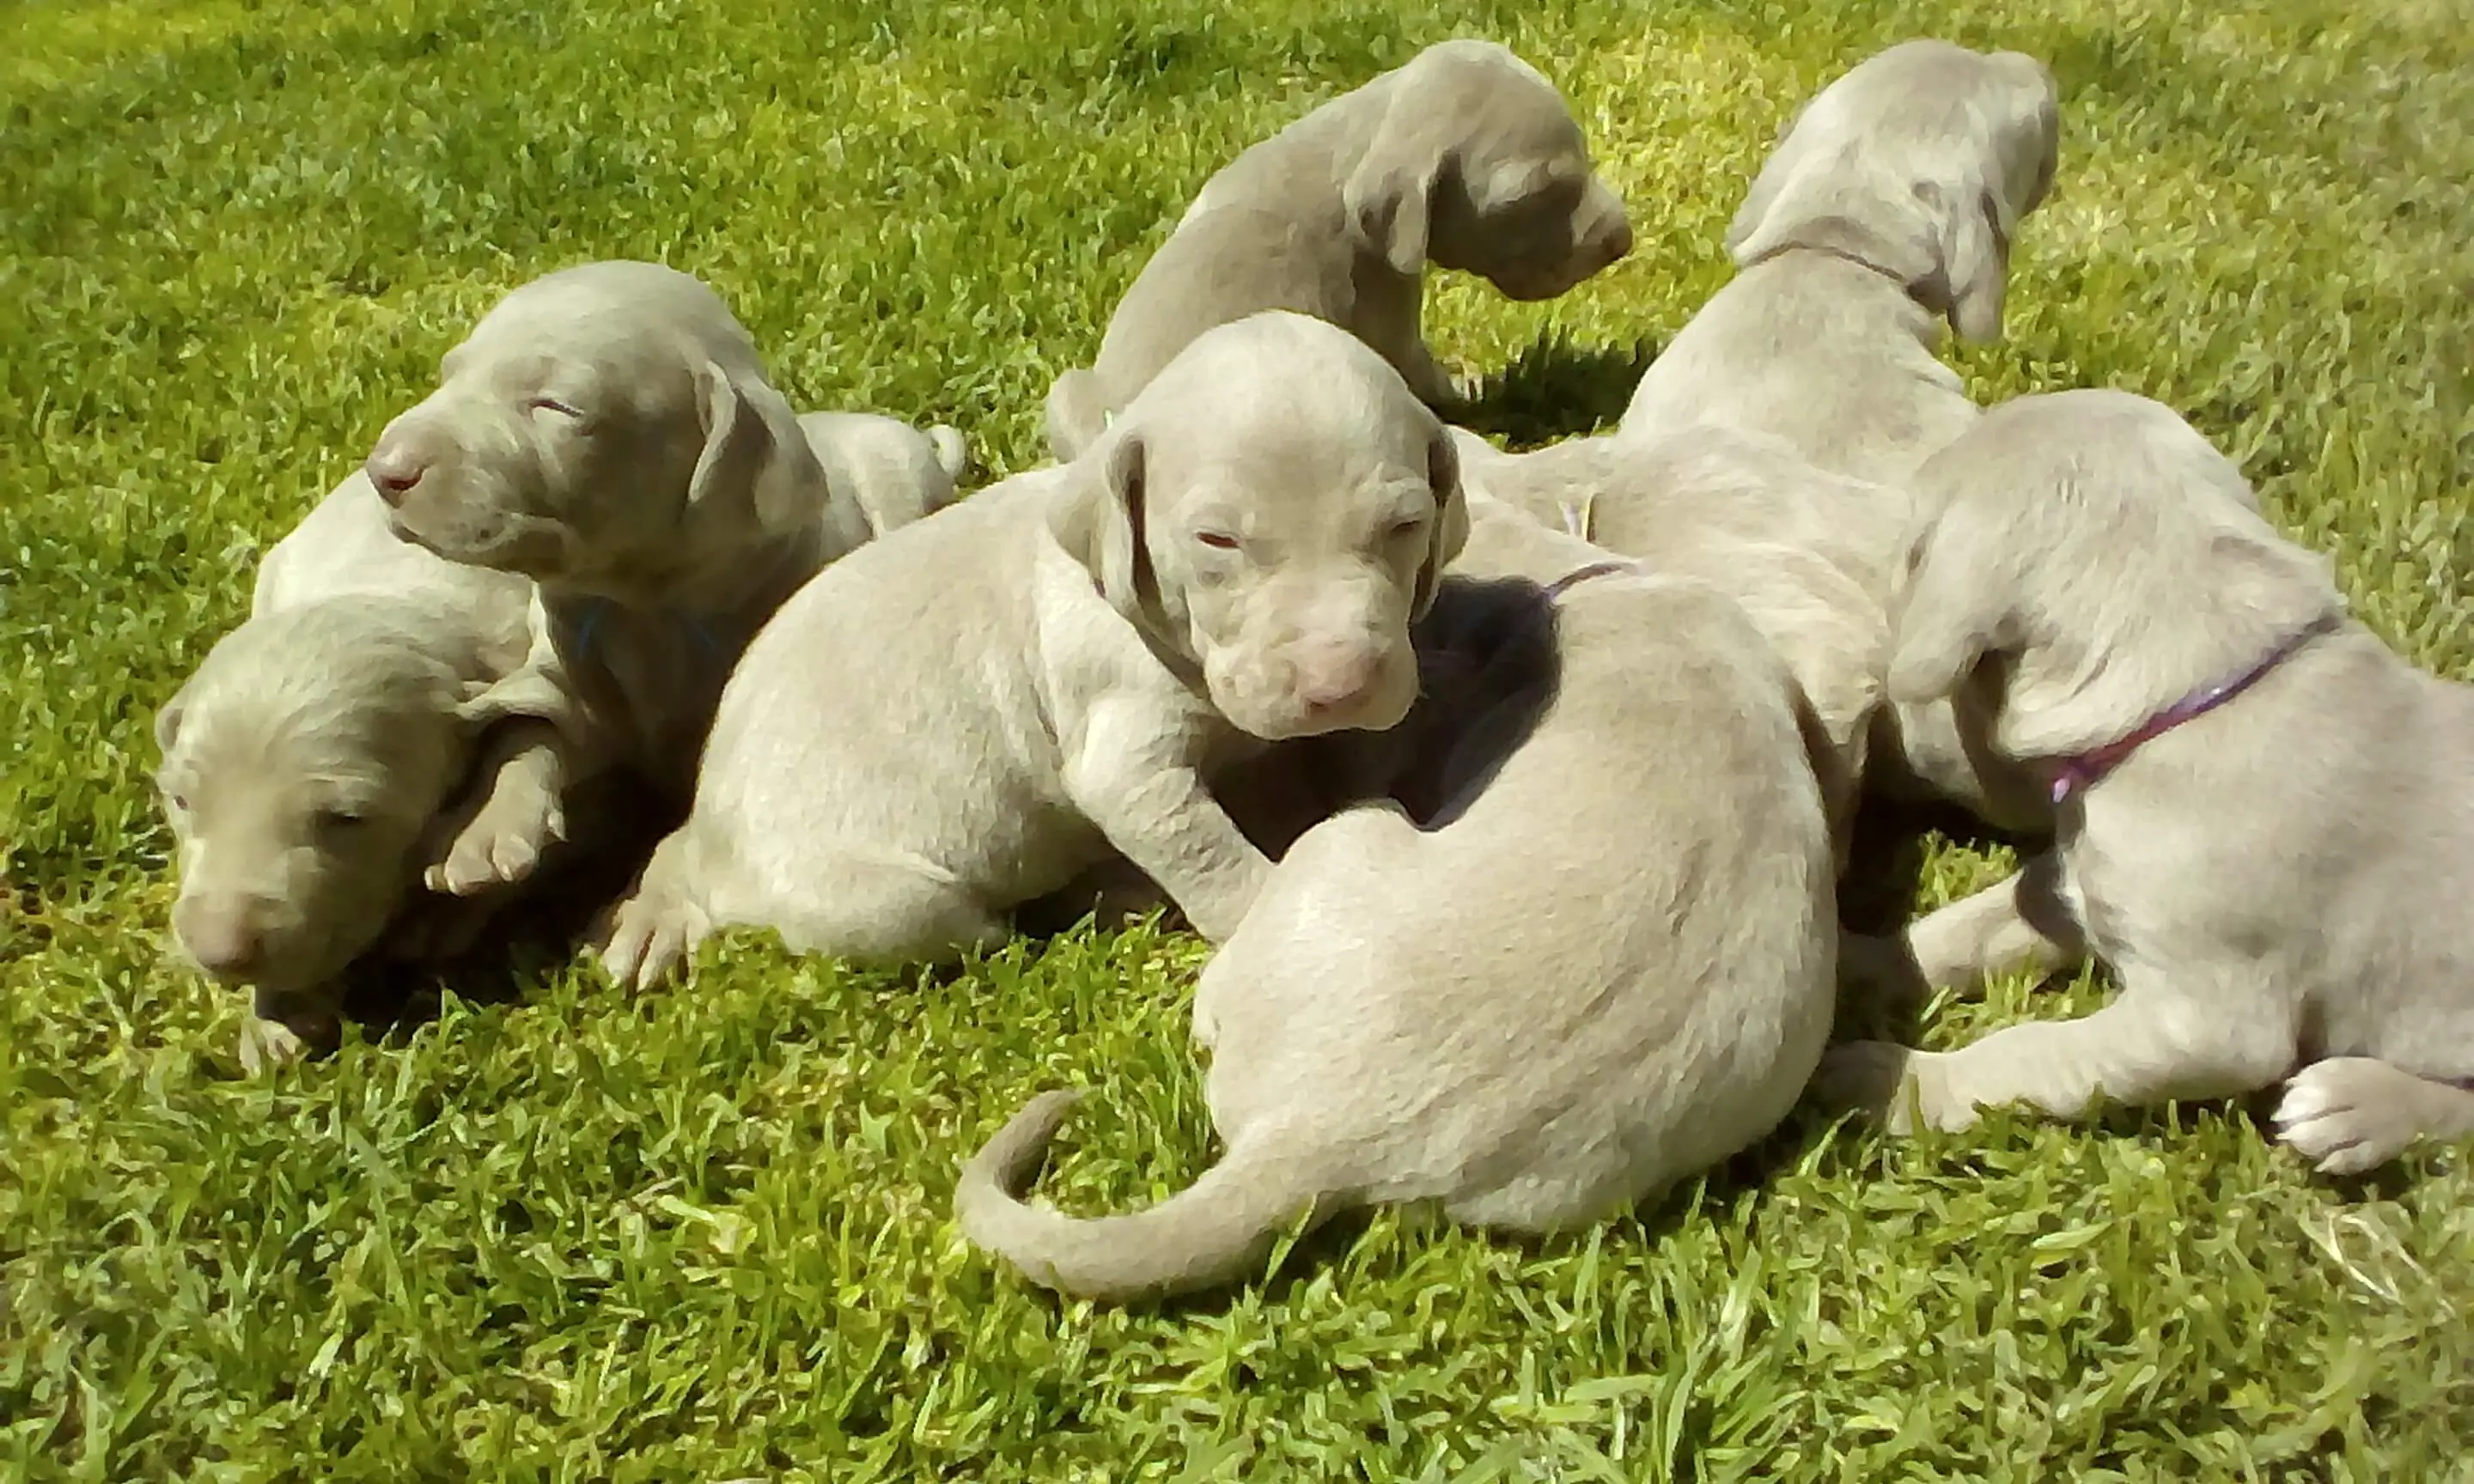 Other Puppies for Sale in Cape Town by Nadia van Deventer